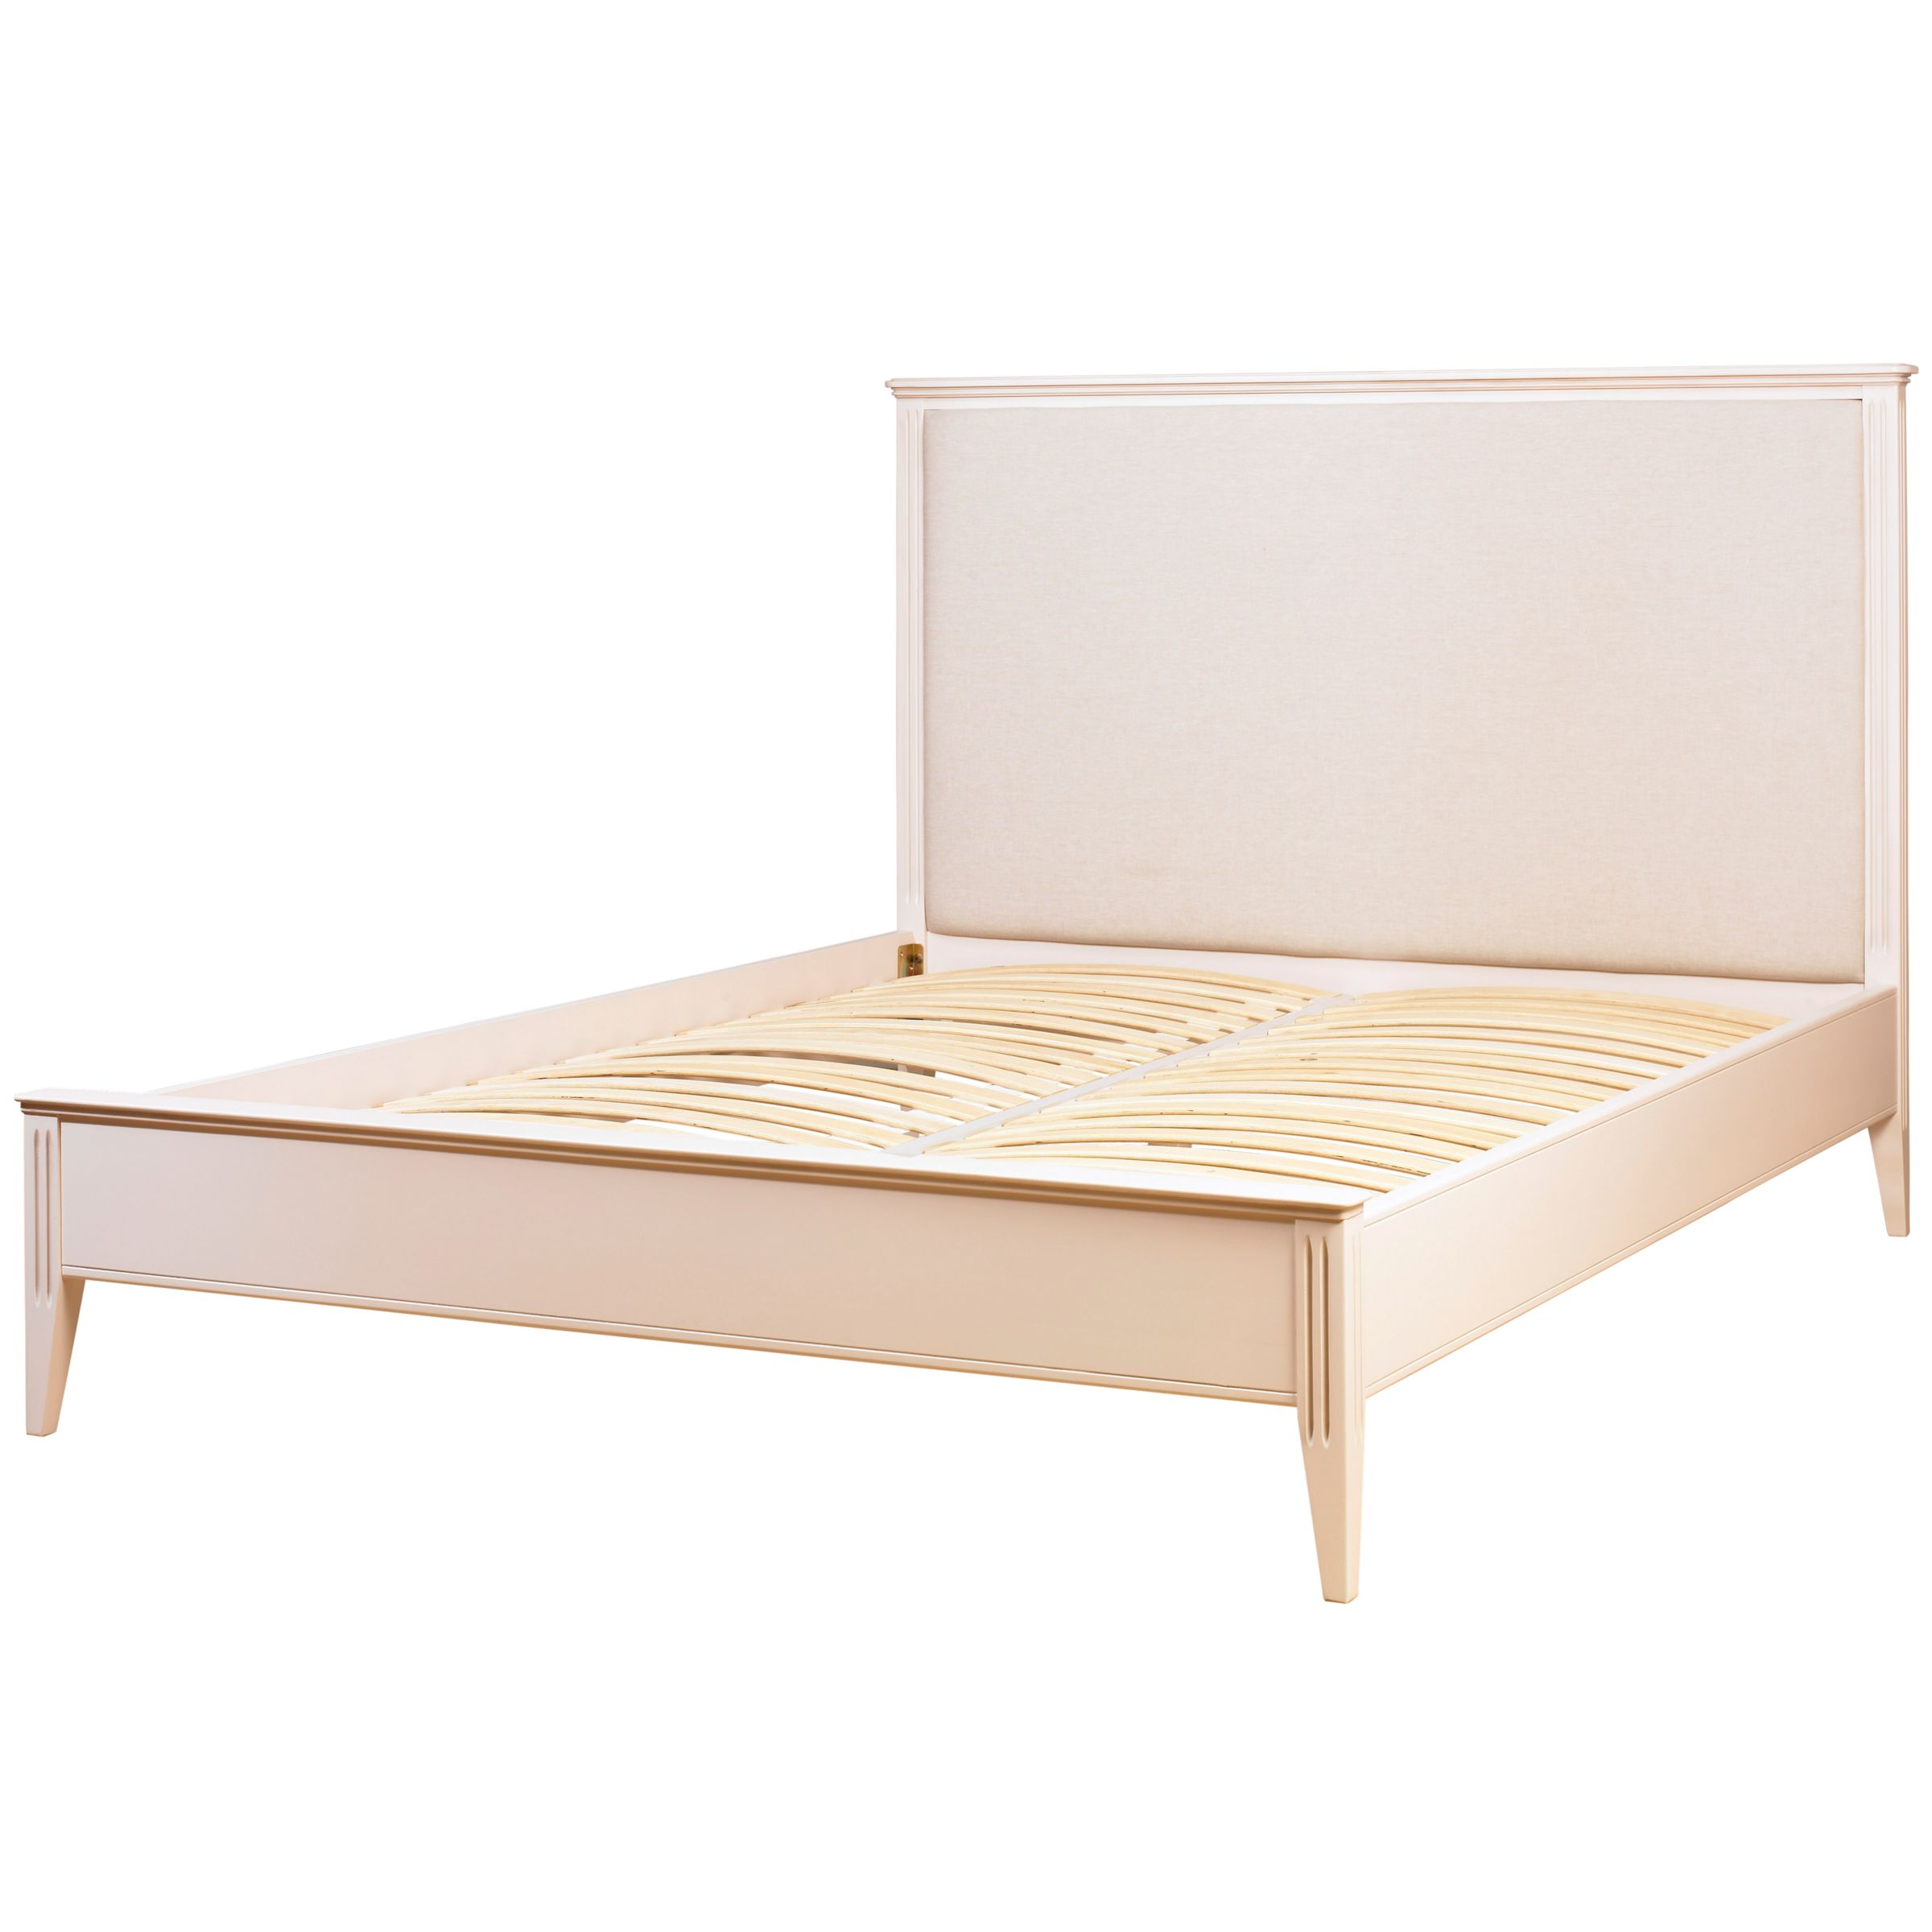 John Lewis Albany Low End Bedstead, Double at John Lewis